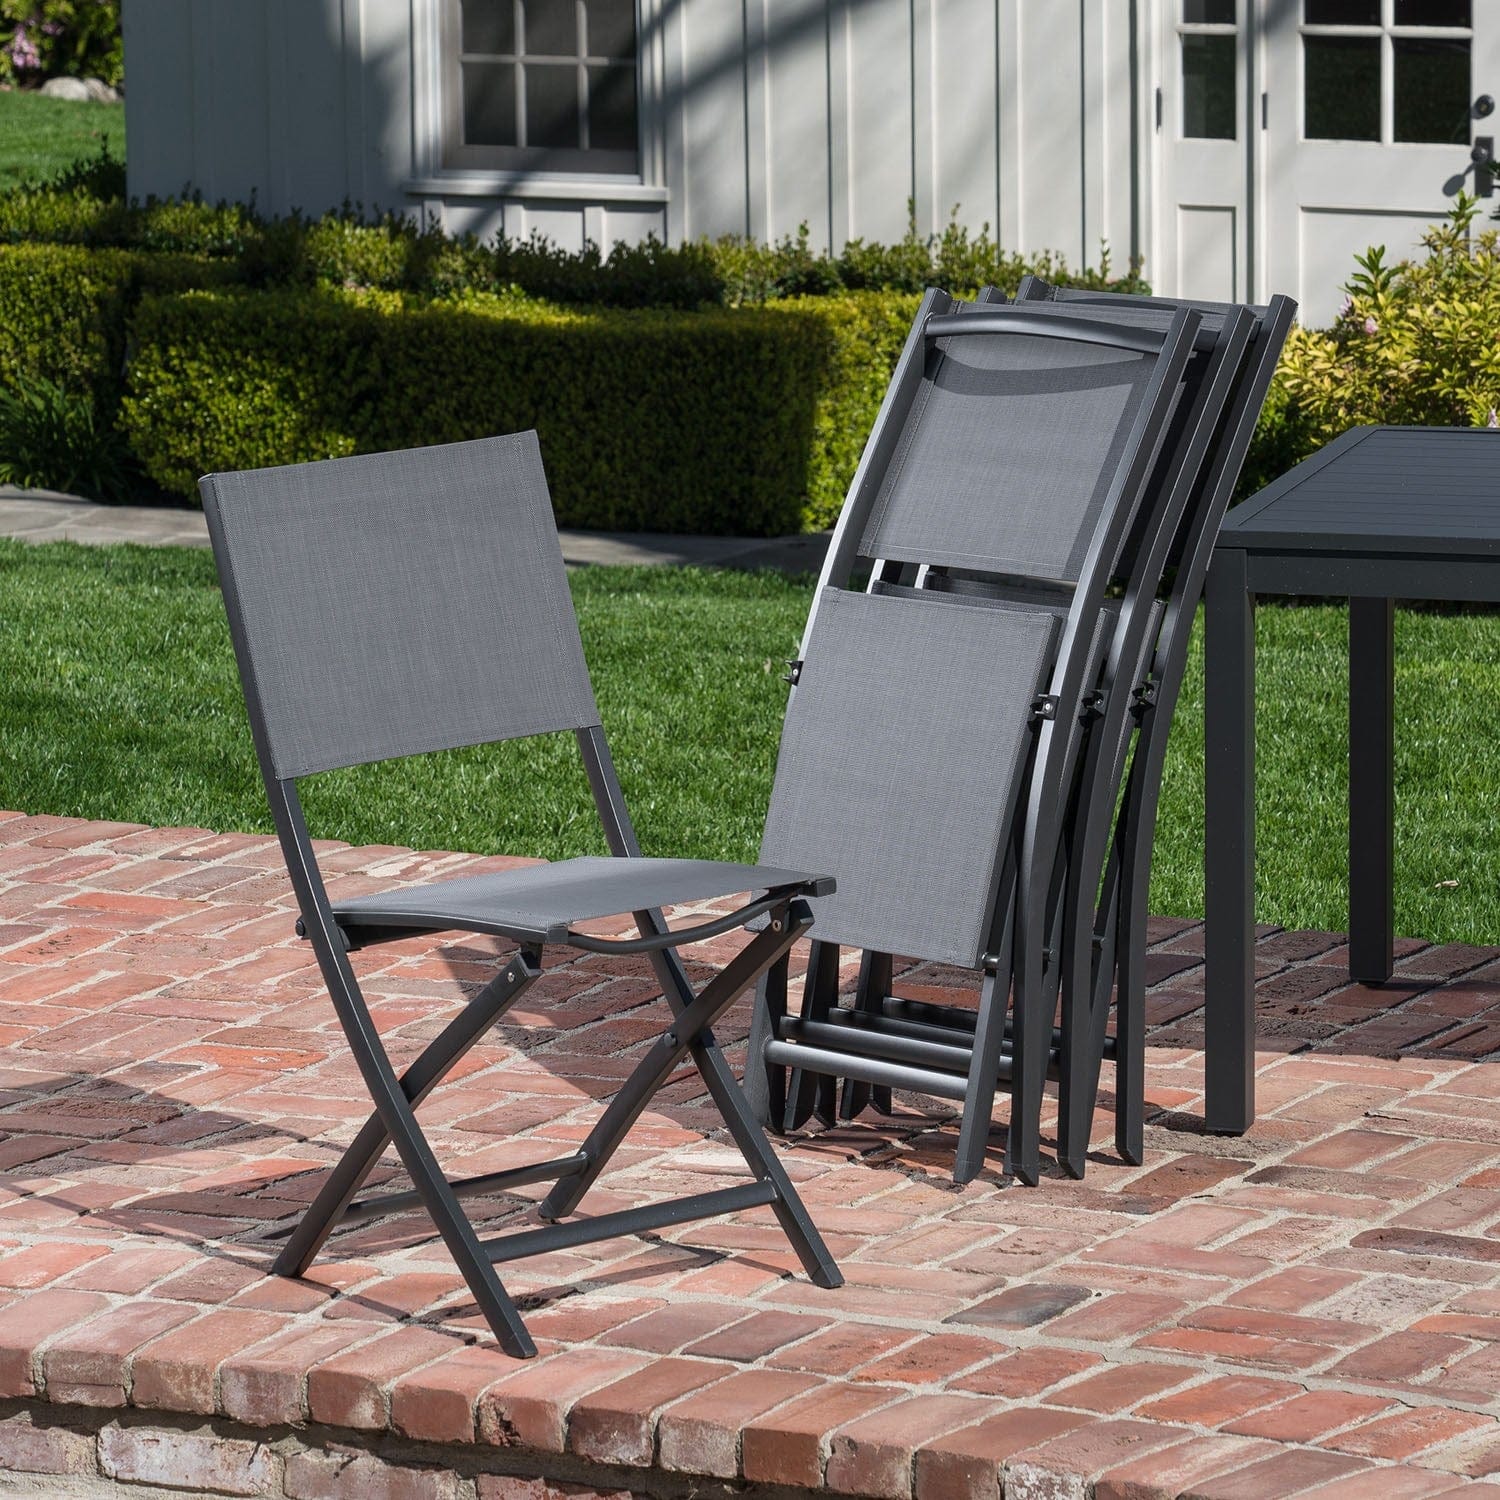 Hanover Outdoor Dining Set Hanover Del Mar 9-Piece Outdoor Dining Set with 8 Folding Sling Chairs in Gray and a White 40" x 118" Expandable Dining Table | DELDN9PCFD-WG